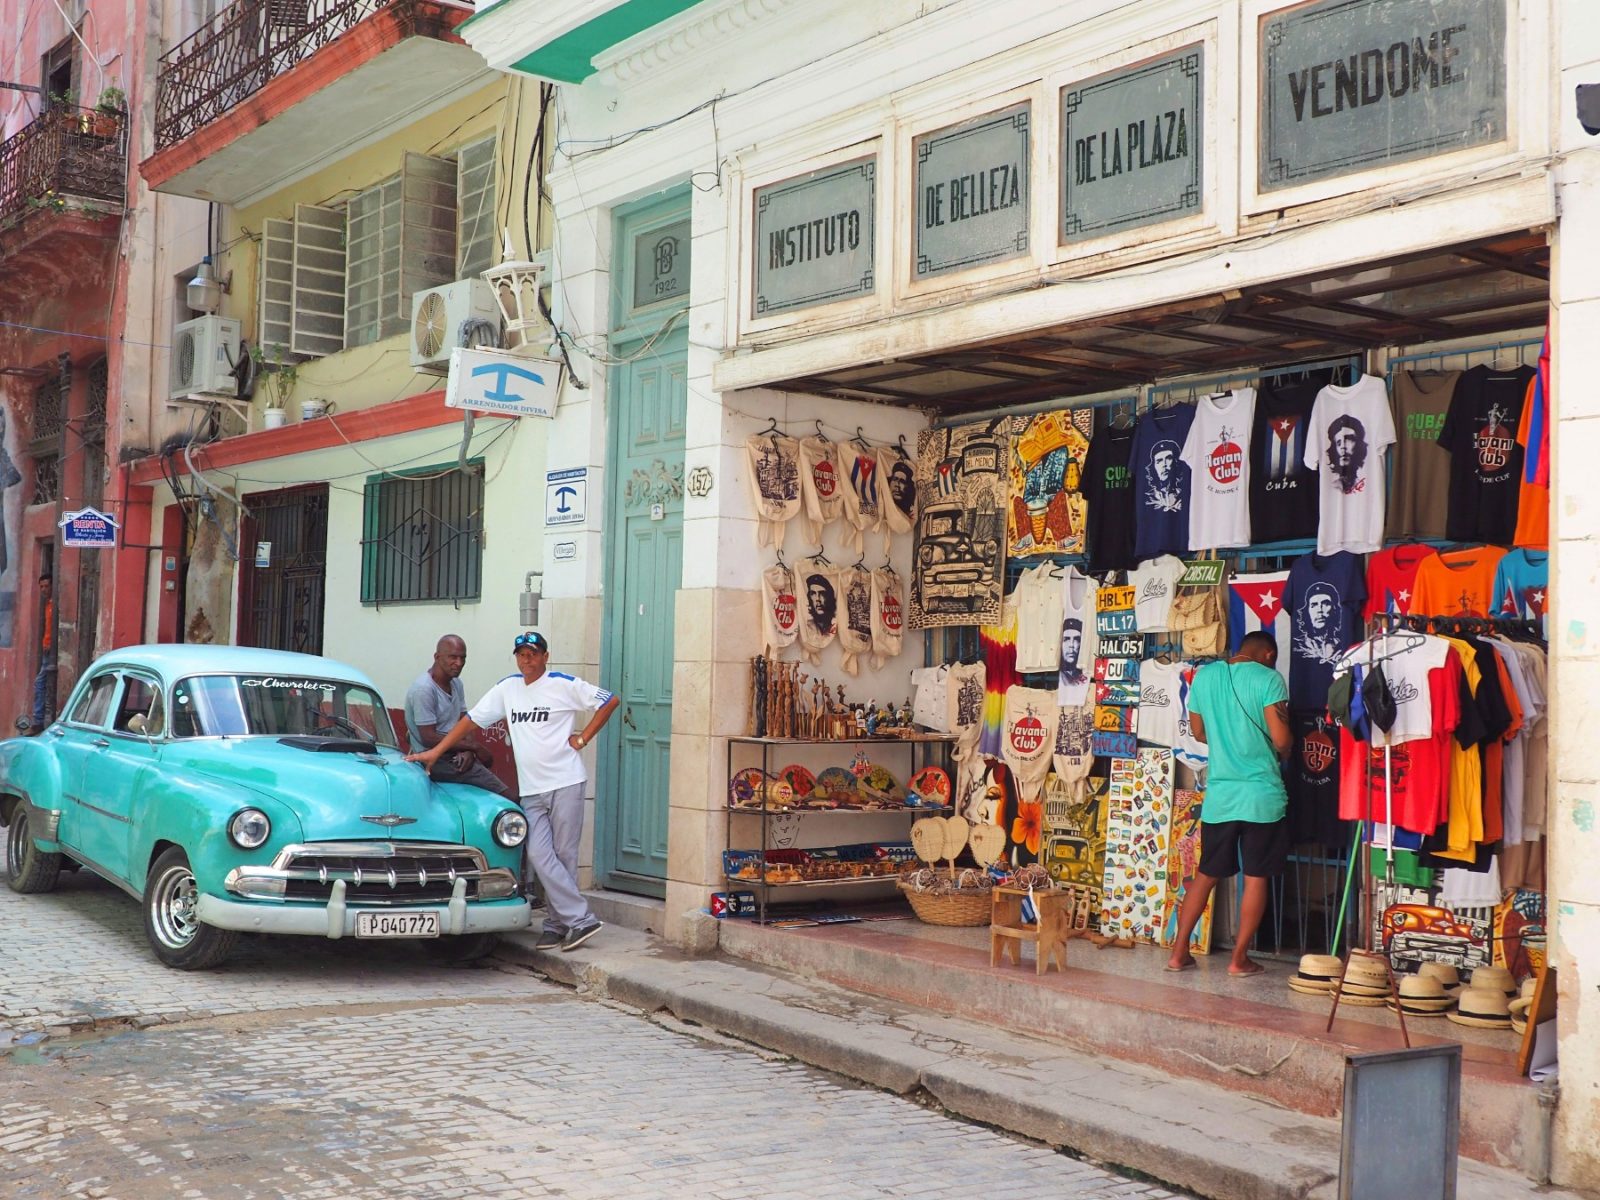 Facts about Cuba